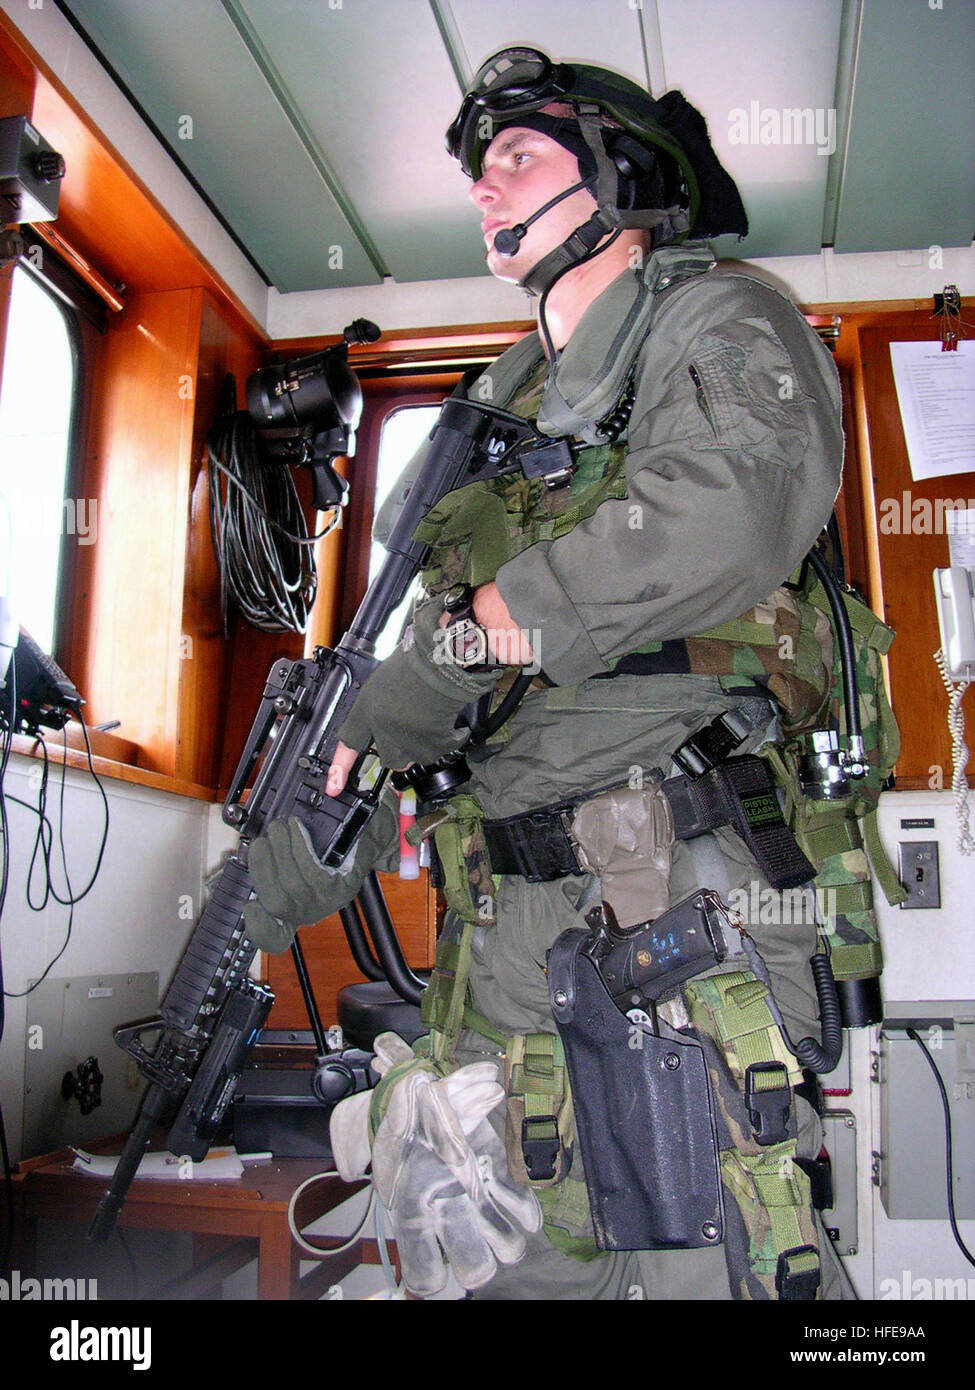 030428-N-8935H-012 At sea aboard MV PVT Franklin J. Phillips (T-AK 3004) Apr. 28, 2003 -- A U.S. Marine stands forward lookout on the bridge of the MV PVT Franklin J. Phillips after being secured during a Visit Board Search and Seizure (VBSS) drill.  The Unit Deployment Program Marines take control of a ship from a non-compliant terrorist group during the scenario.  Frank J. Phillips is an integral member of Commander, Maritime Prepositioning Ships Squadron Three (COMPSRON 3).  U.S. Navy photo by Photographer’s Mate 2nd Class Edward L Holland.  (RELEASED) US Navy 030428-N-8935H-012 A U.S. Mari Stock Photo